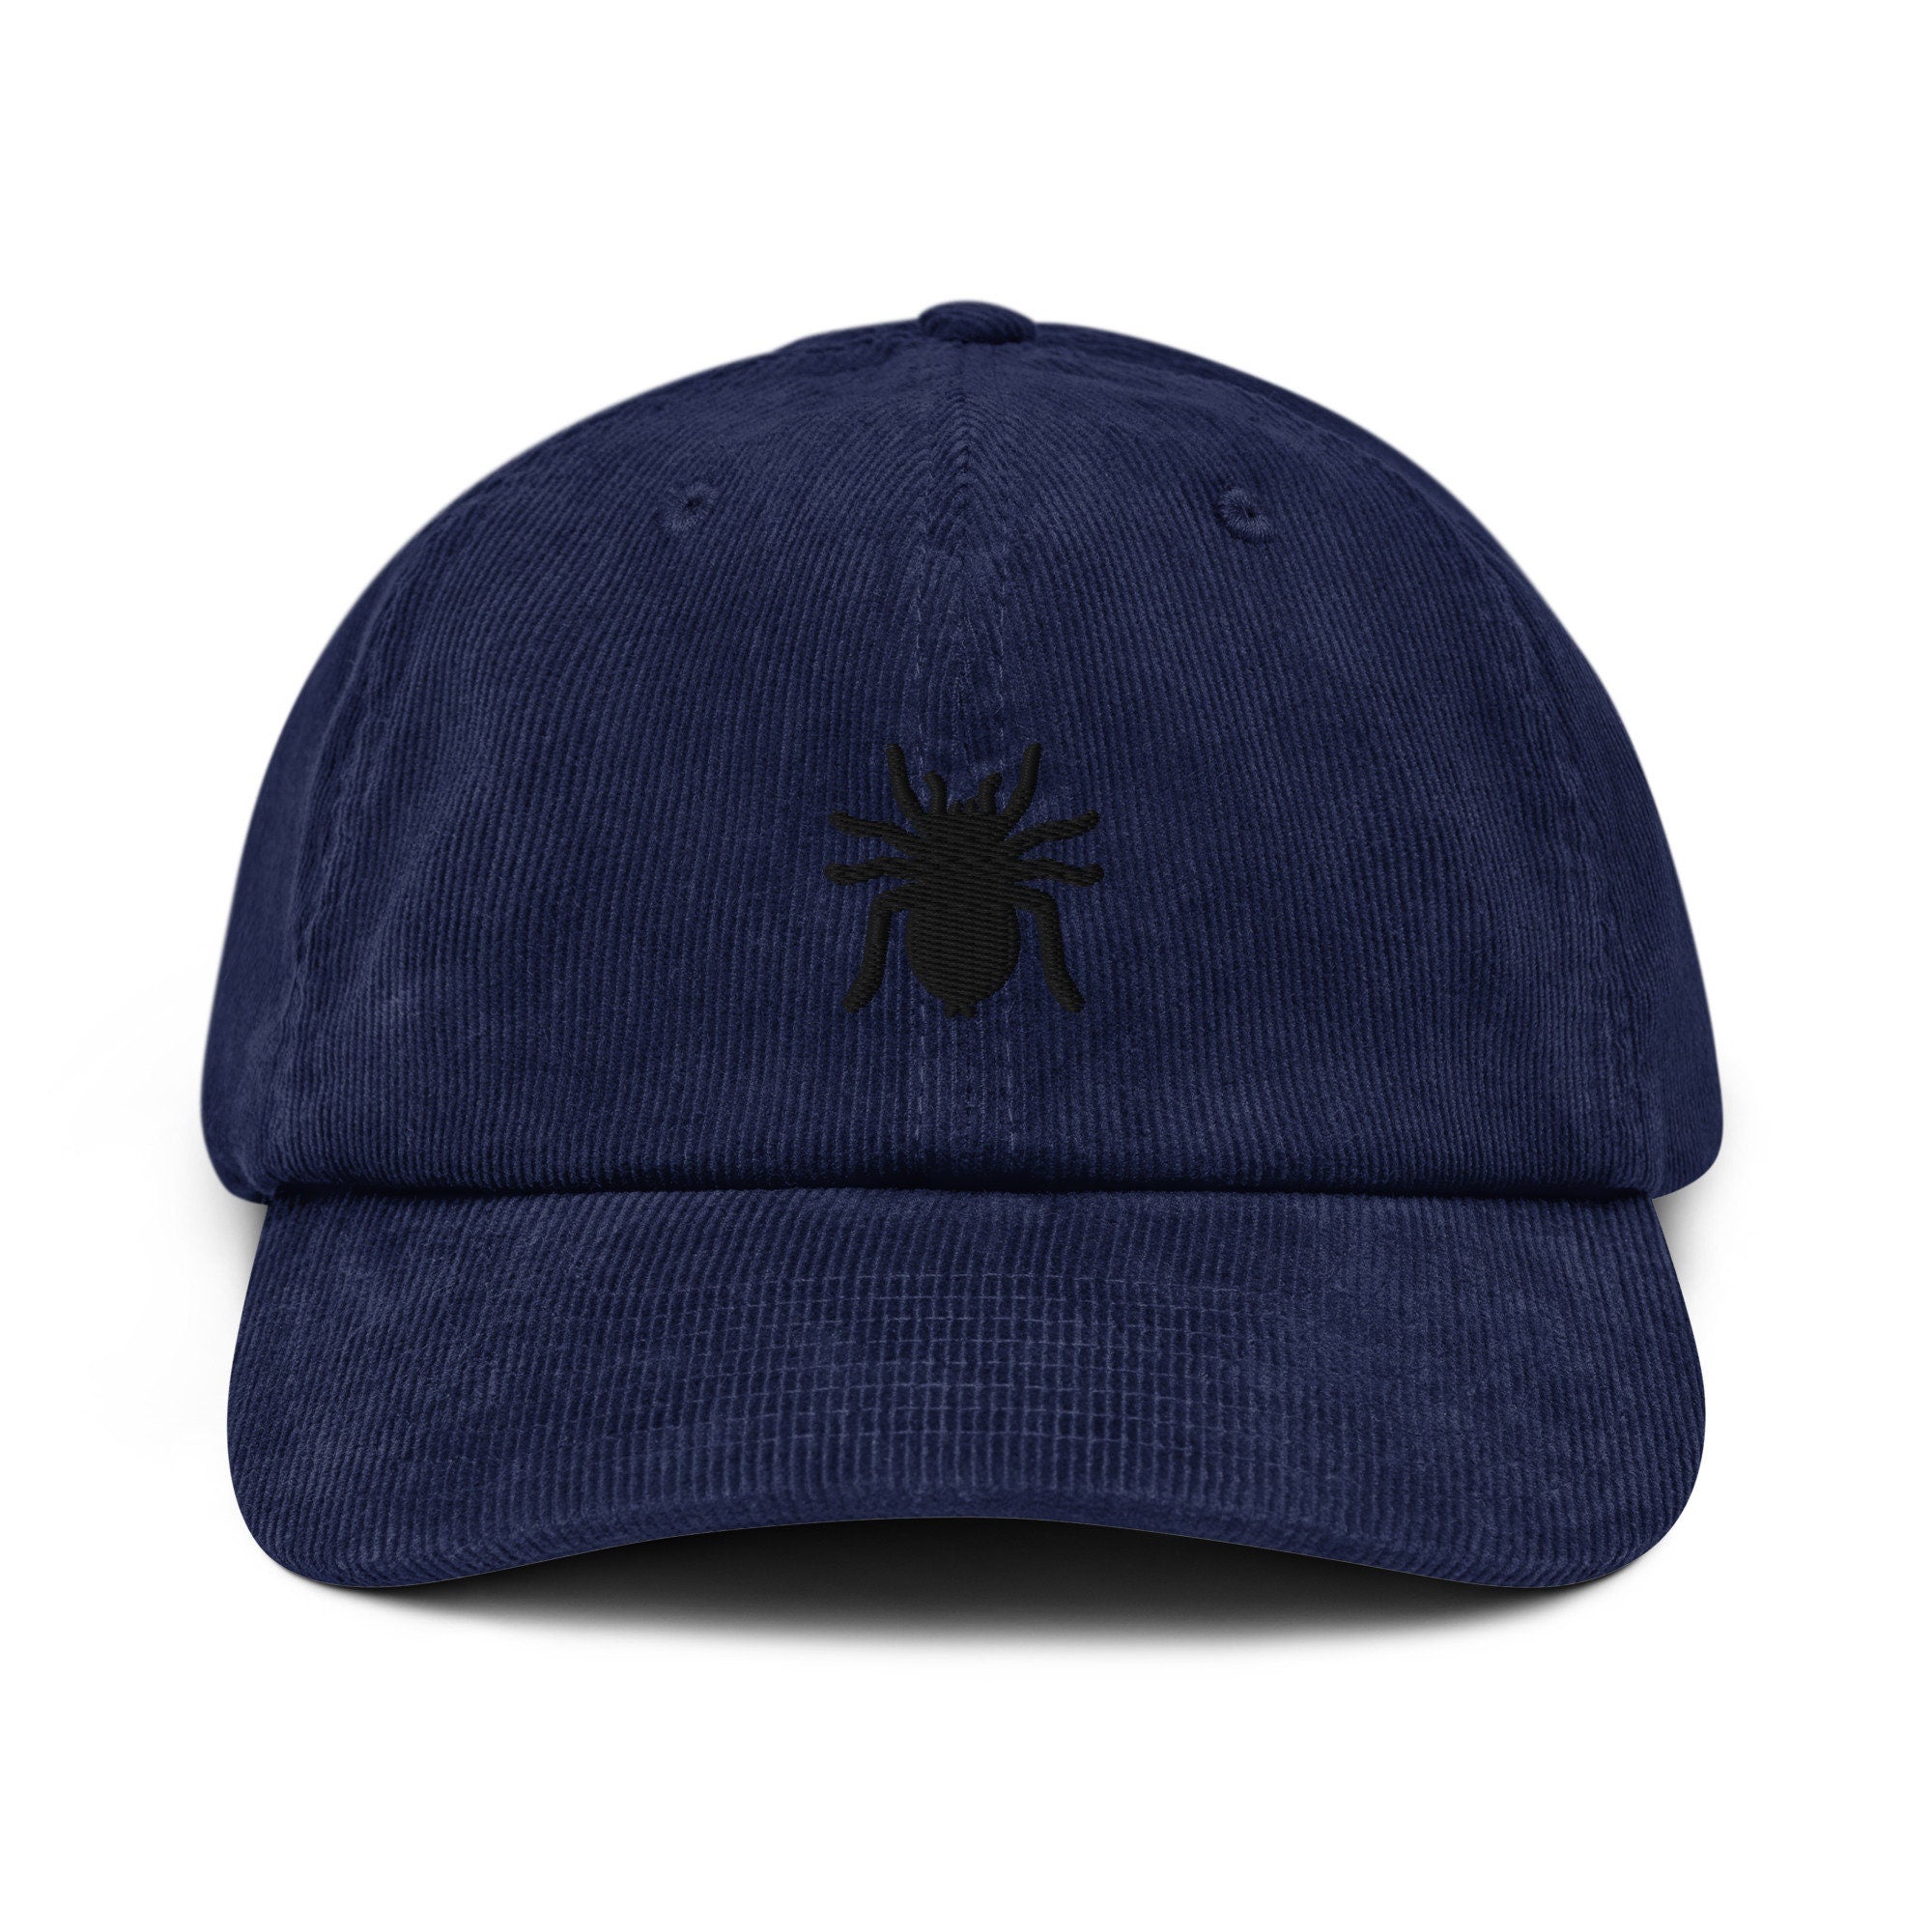 Spider Corduroy Hat, Handmade Embroidered Corduroy Dad Cap - Multiple Colors